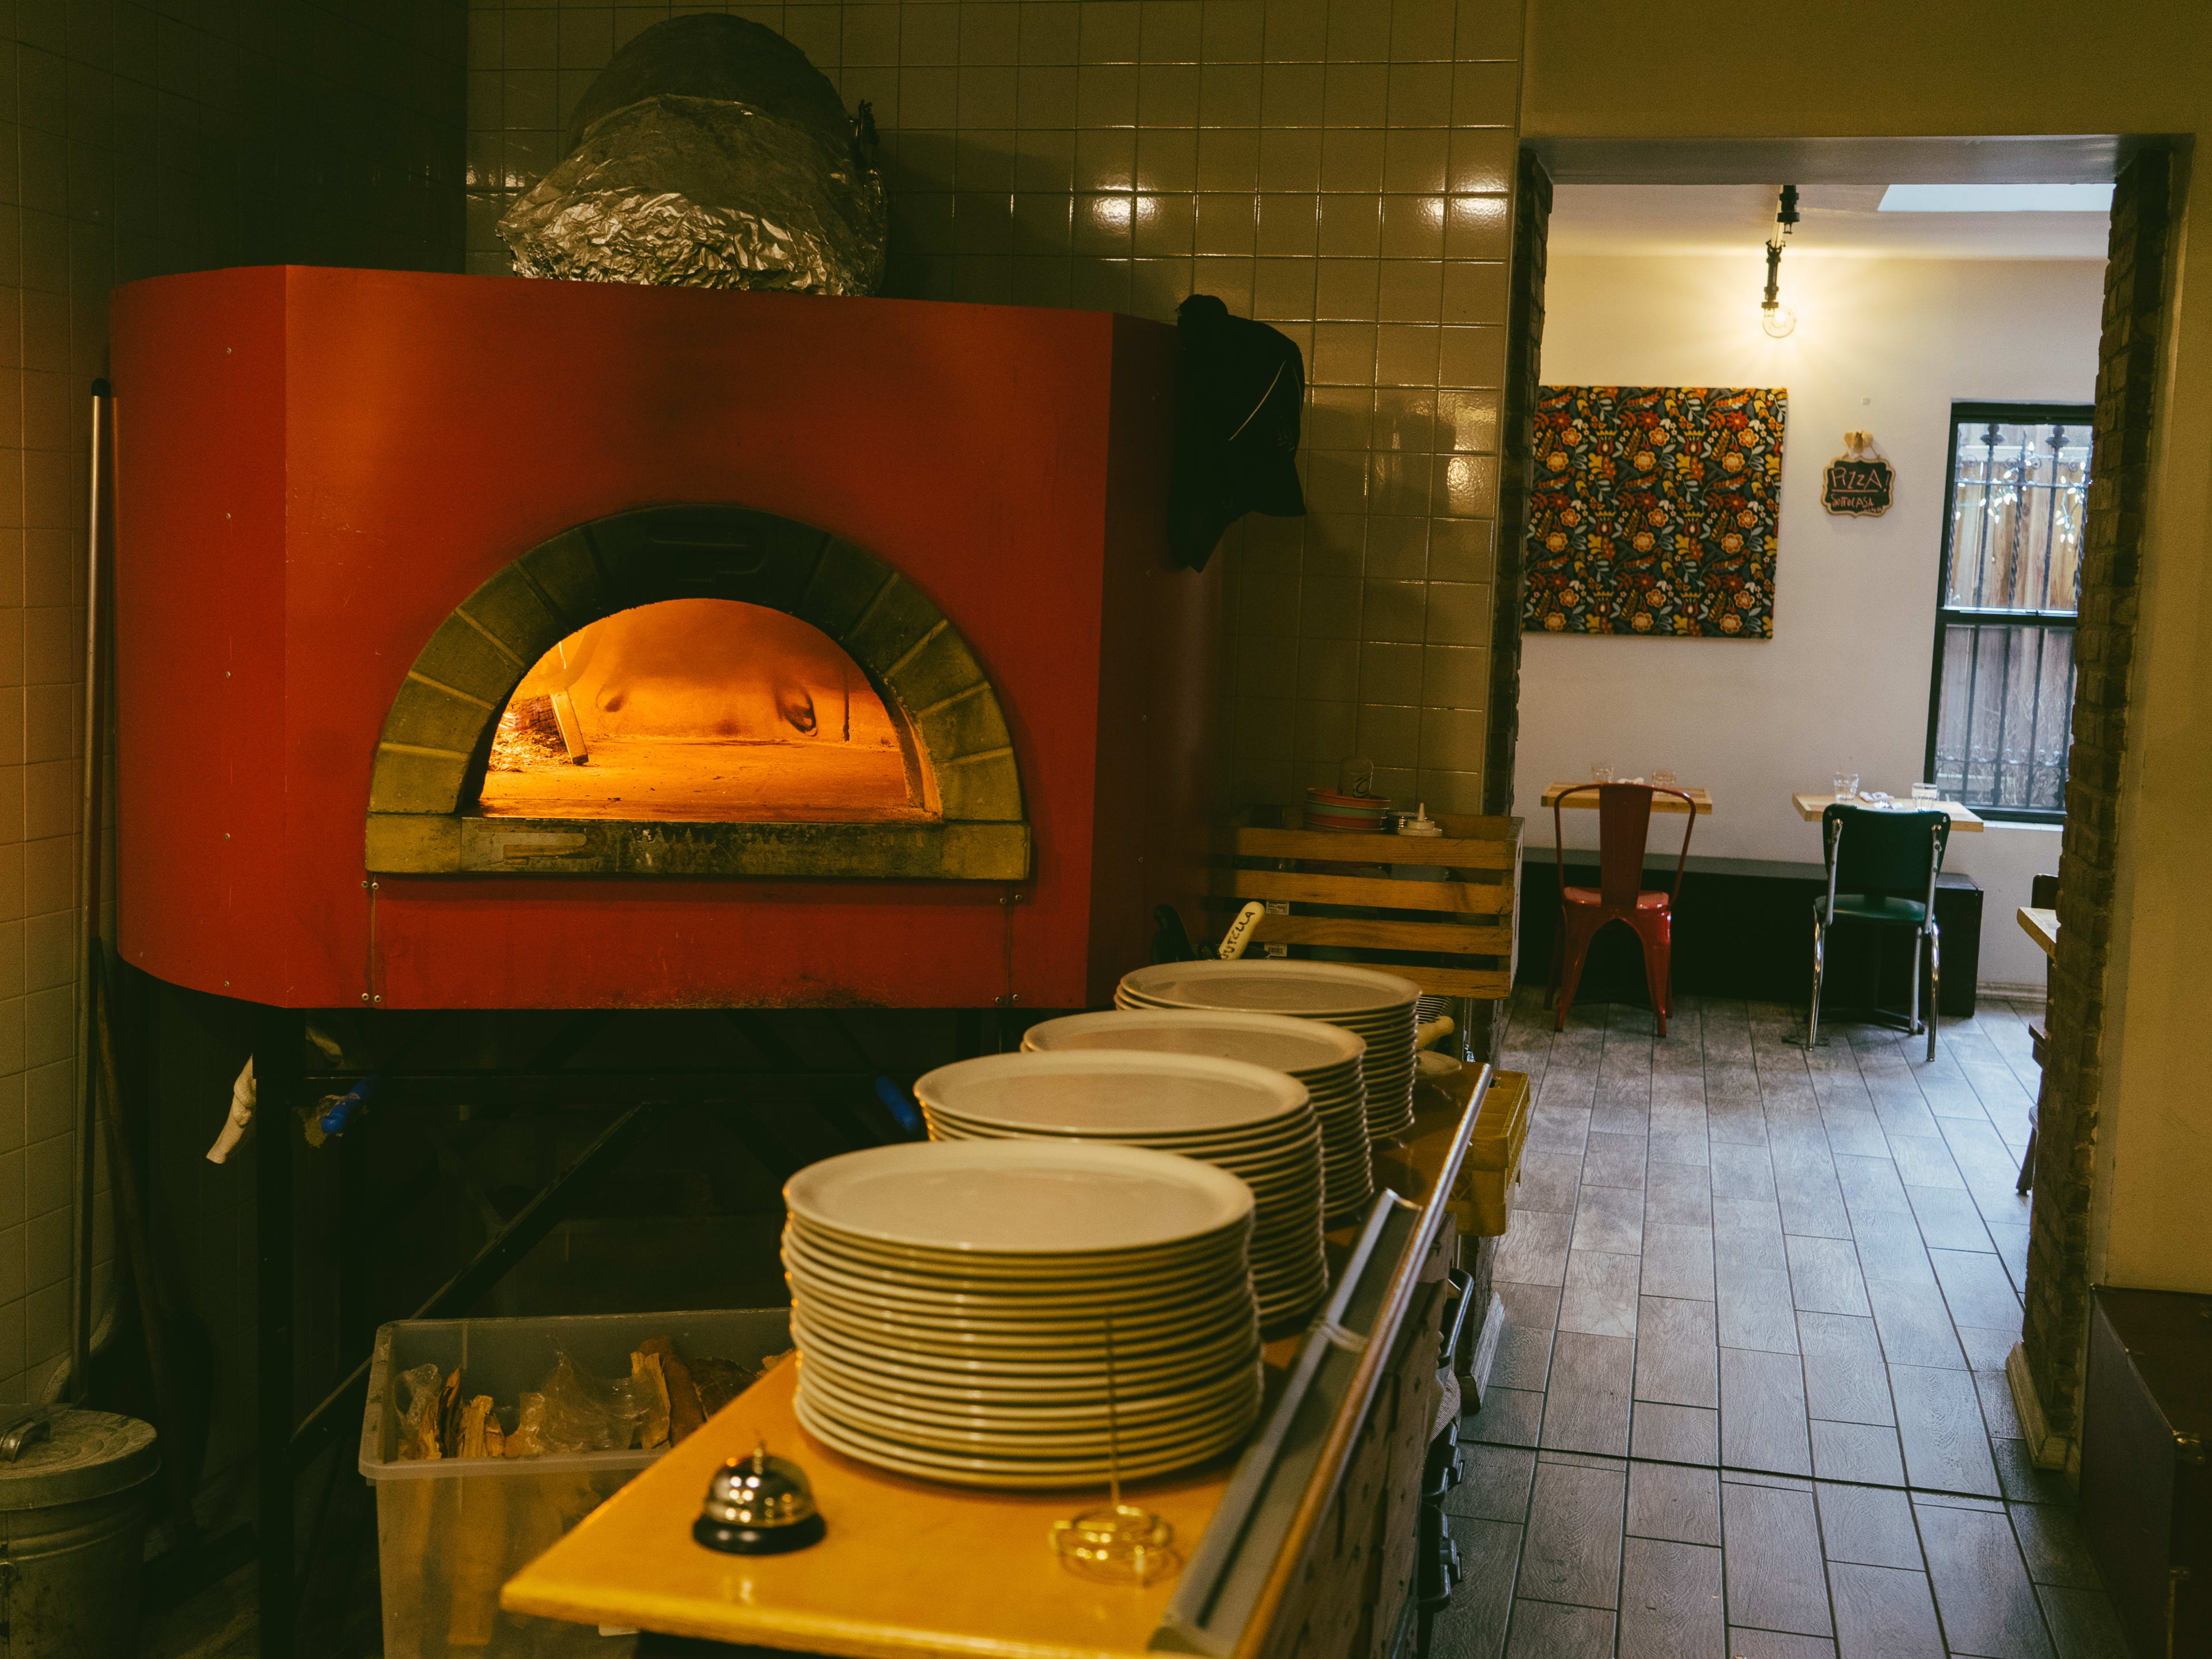 The pizza oven at Sottocasa.